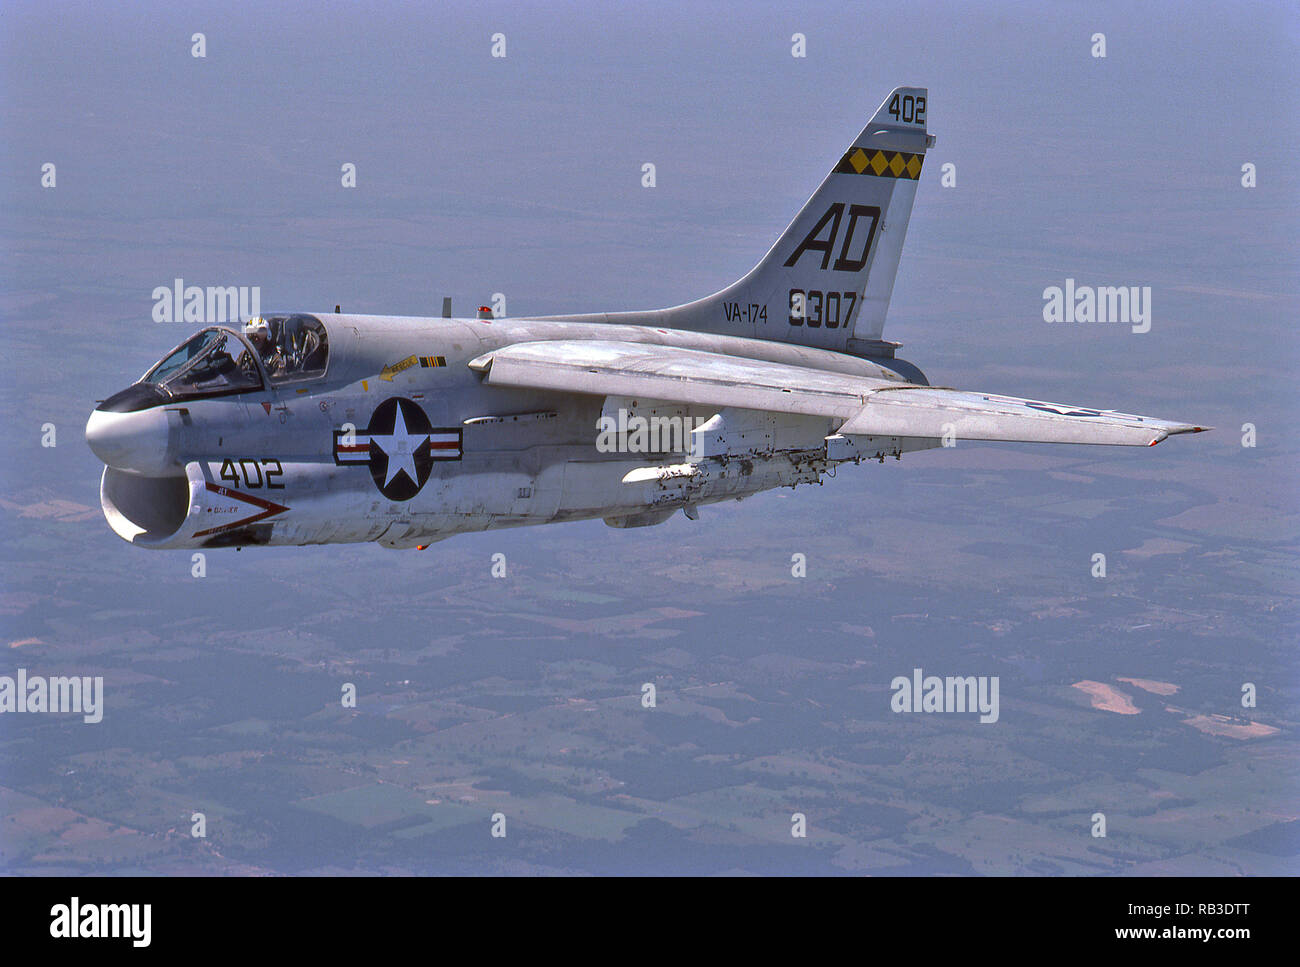 A 7 corsair ii stock photography and images - Alamy